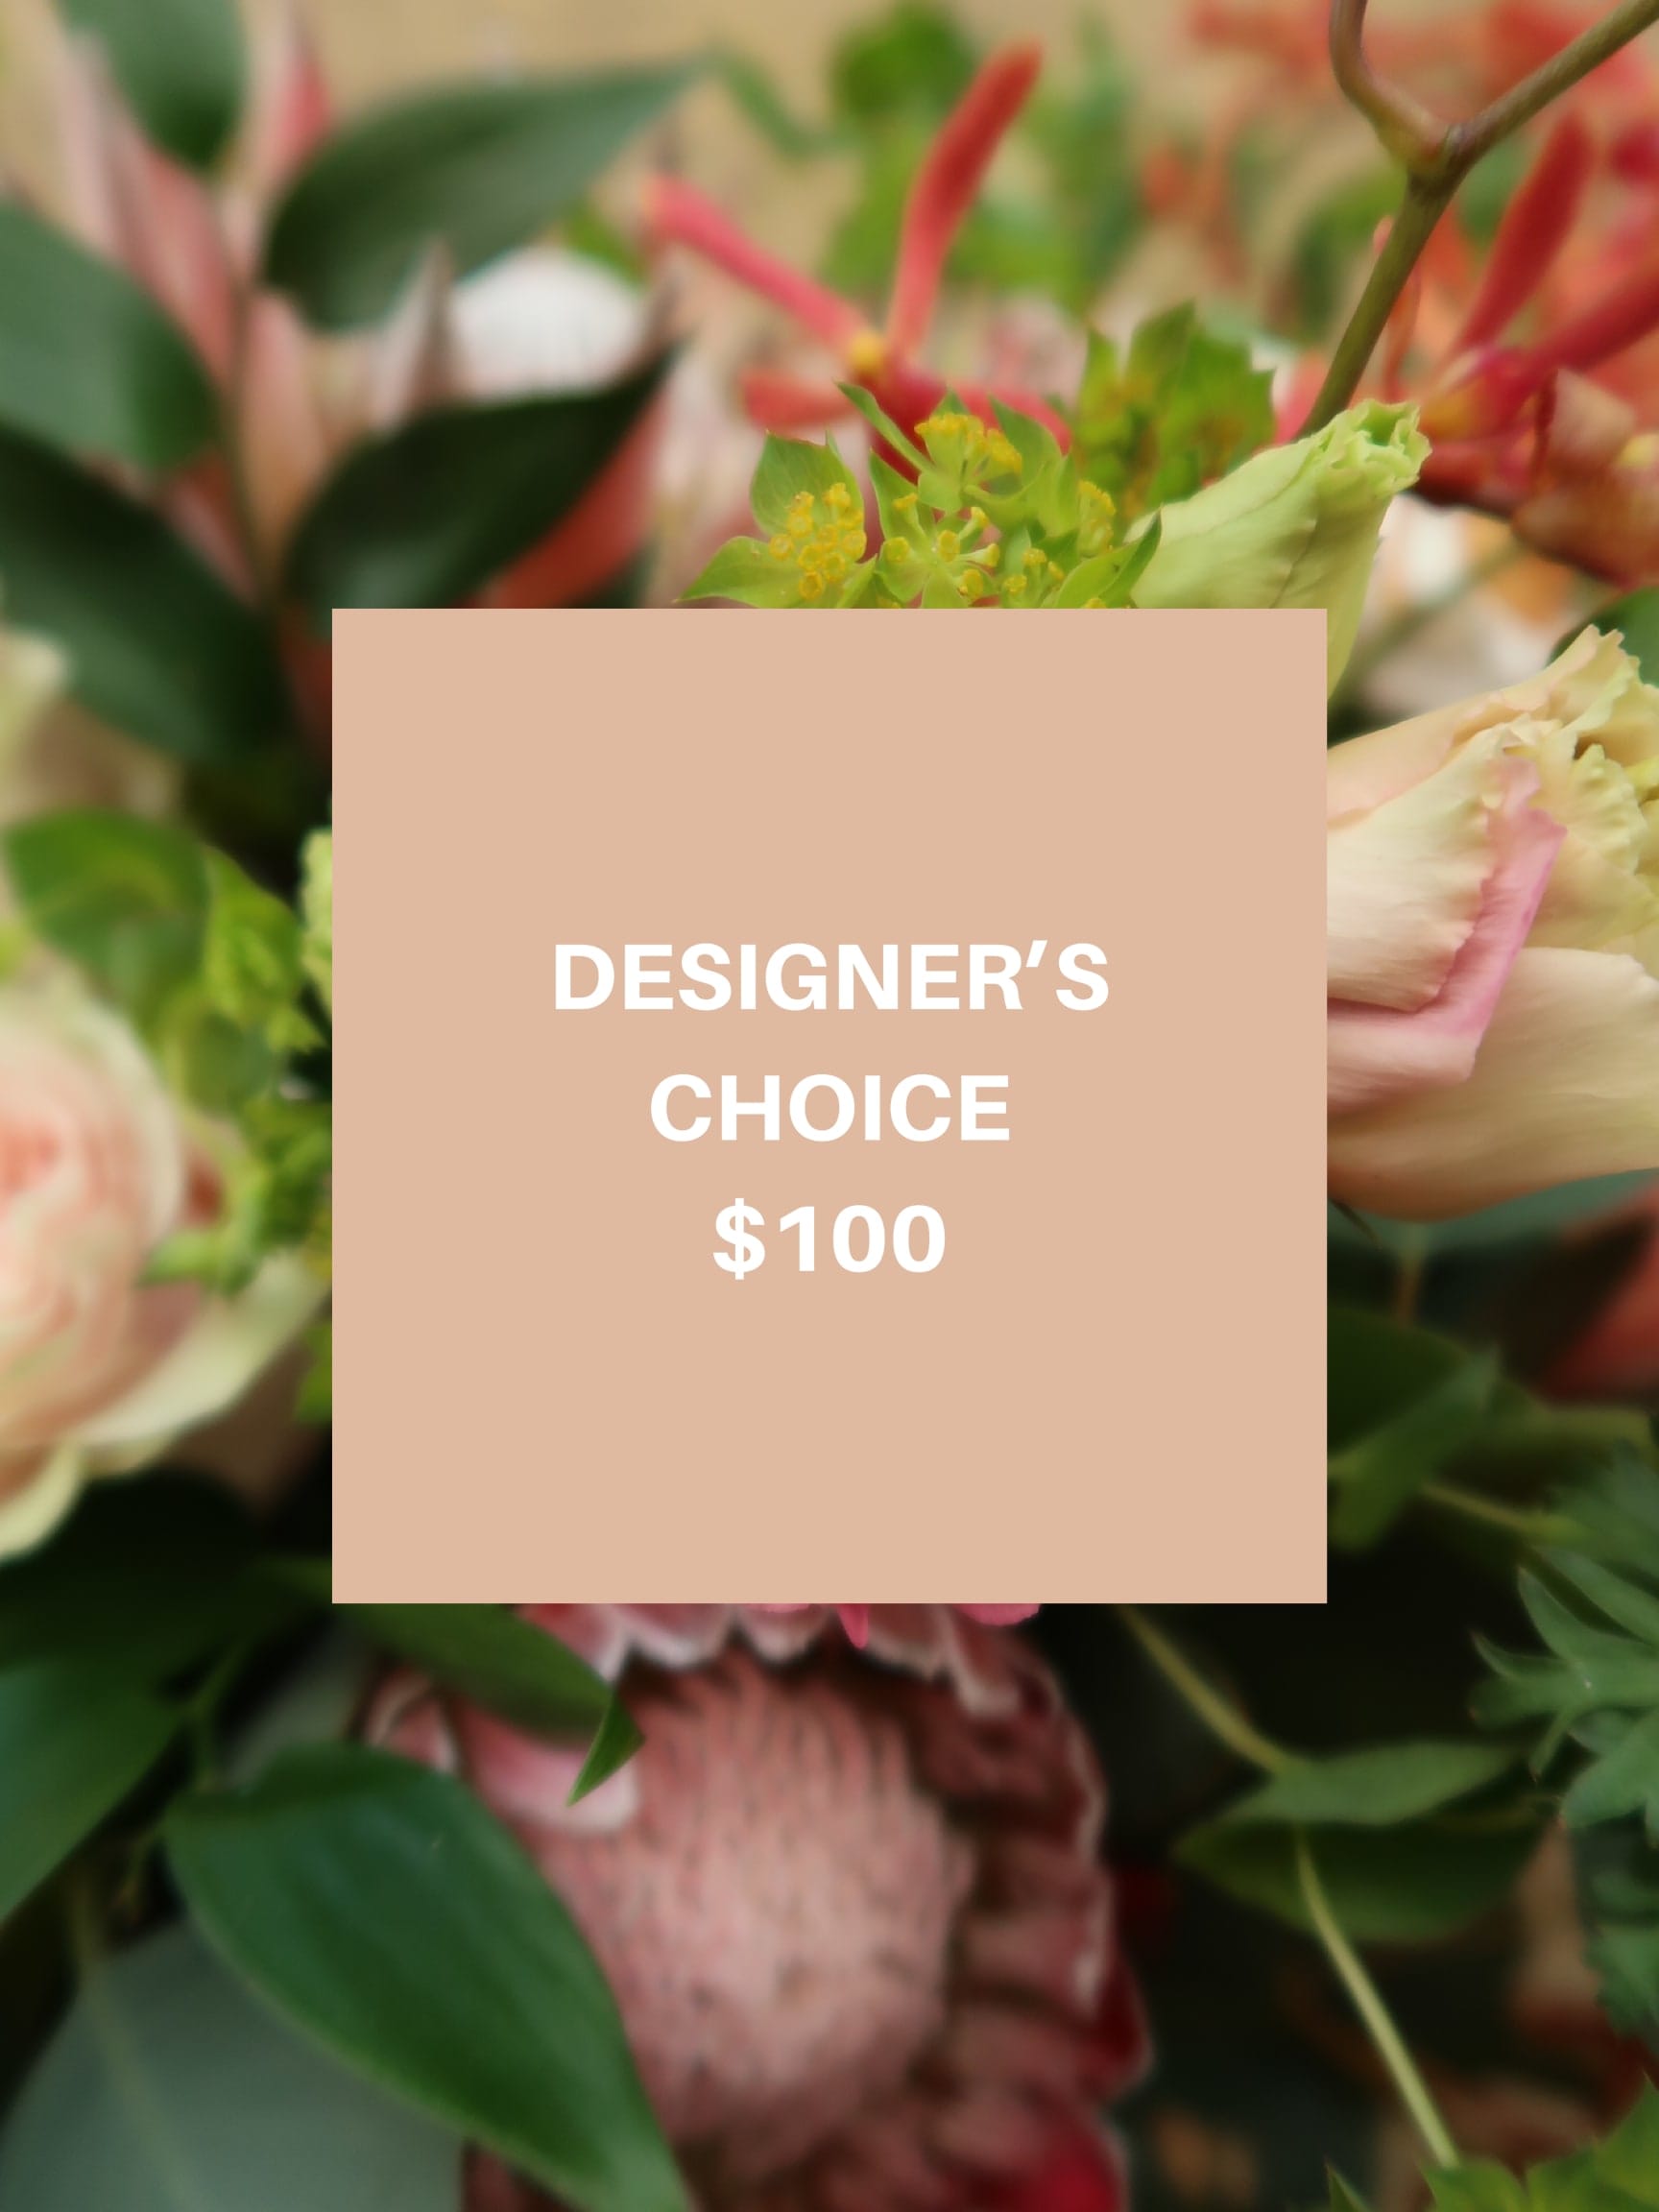 AG2 Designers Choice  - Let our amazing designers create a custom piece with the best seasonal flowers and tones that are sure to impress.